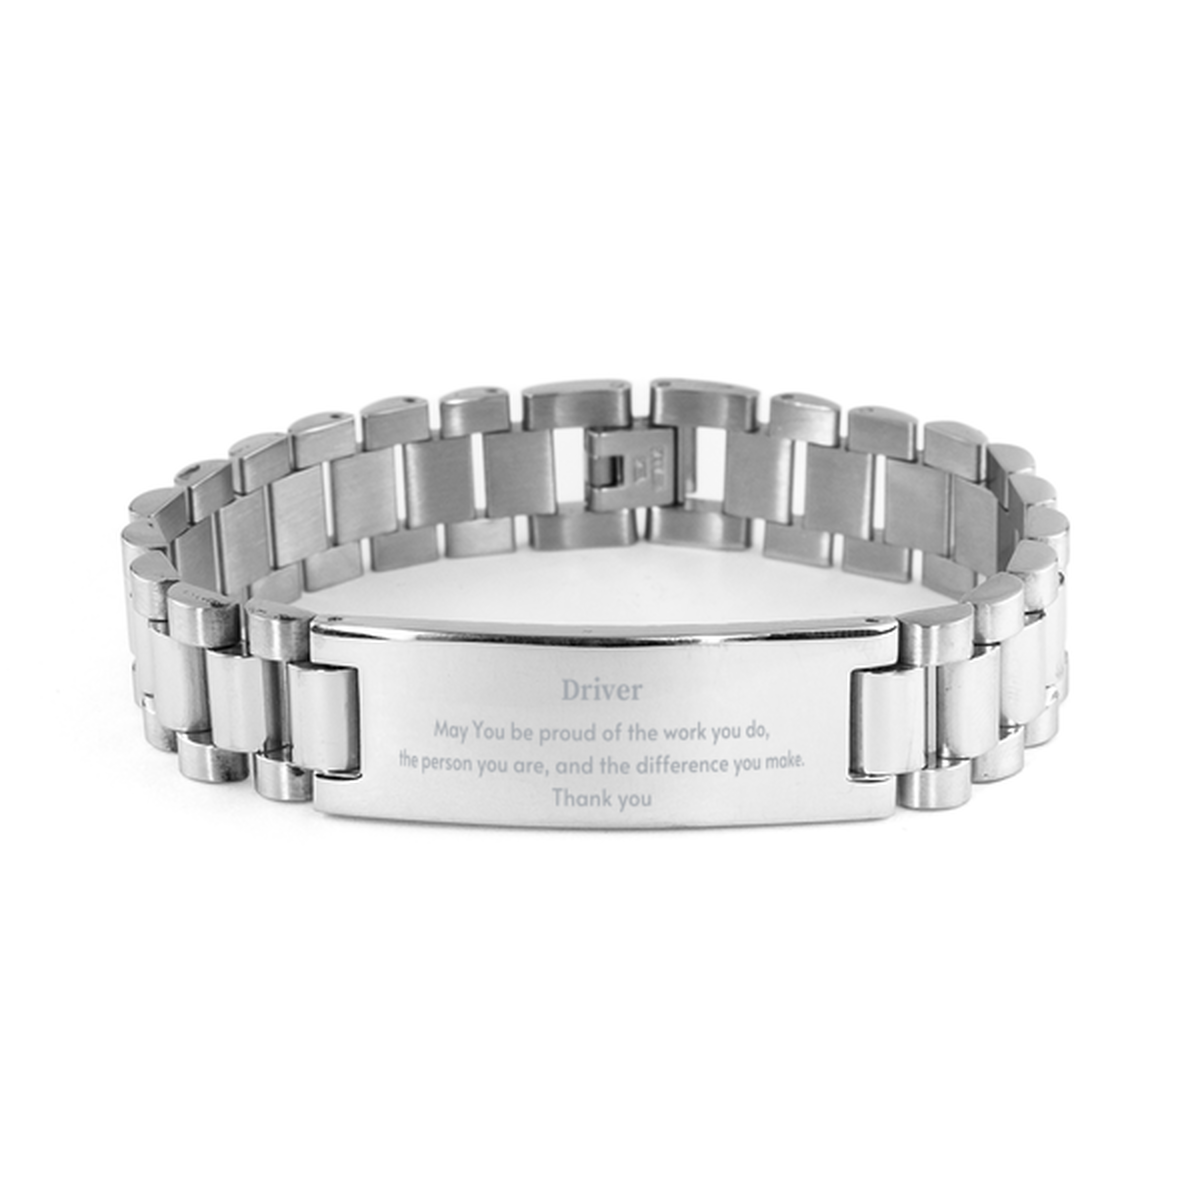 Heartwarming Ladder Stainless Steel Bracelet Retirement Coworkers Gifts for Driver, Driver May You be proud of the work you do, the person you are Gifts for Boss Men Women Friends